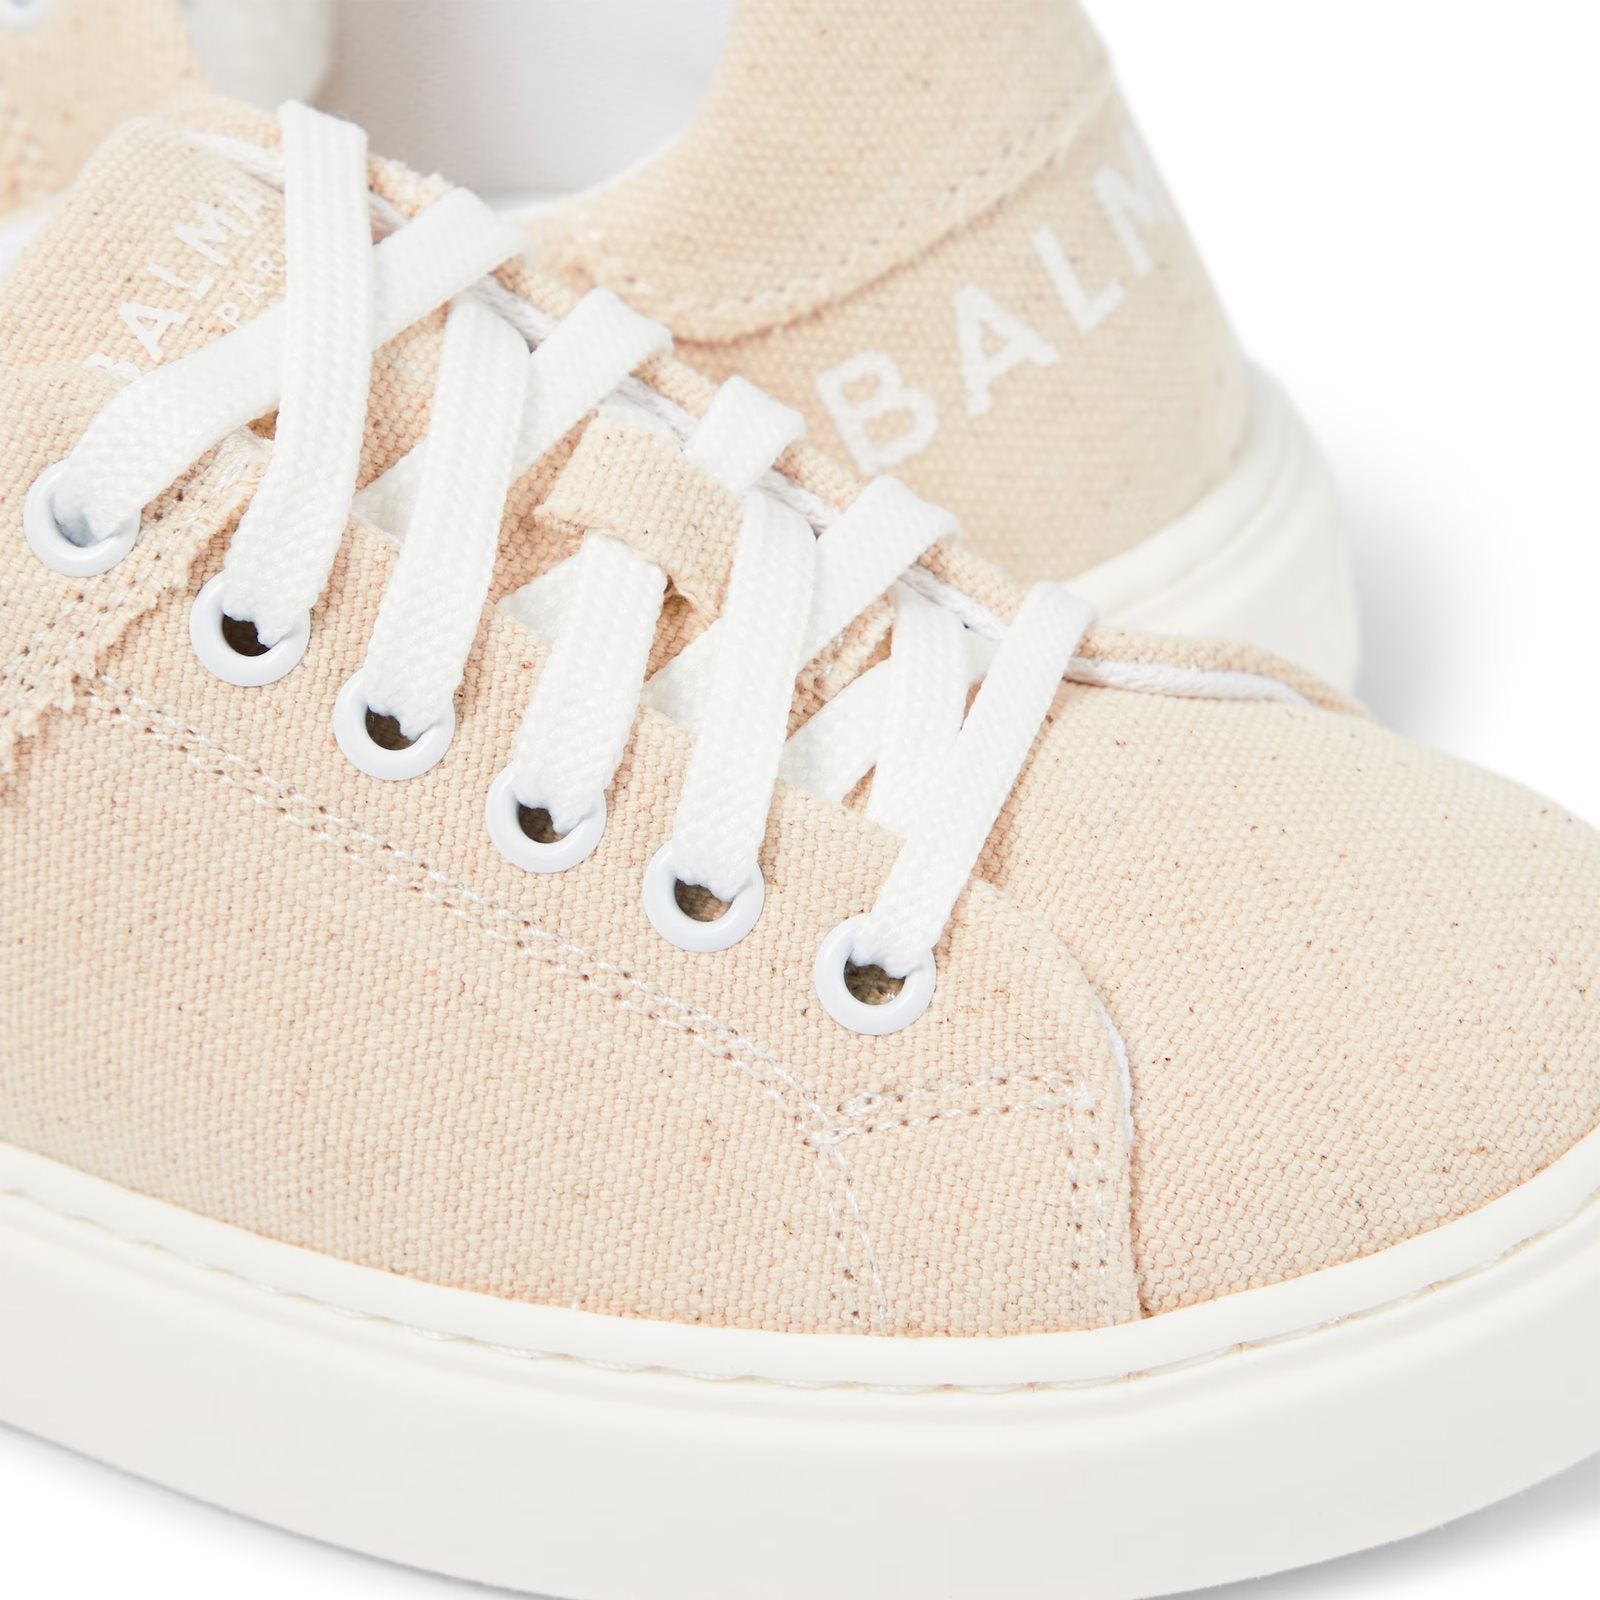 B-Court canvas sneakers